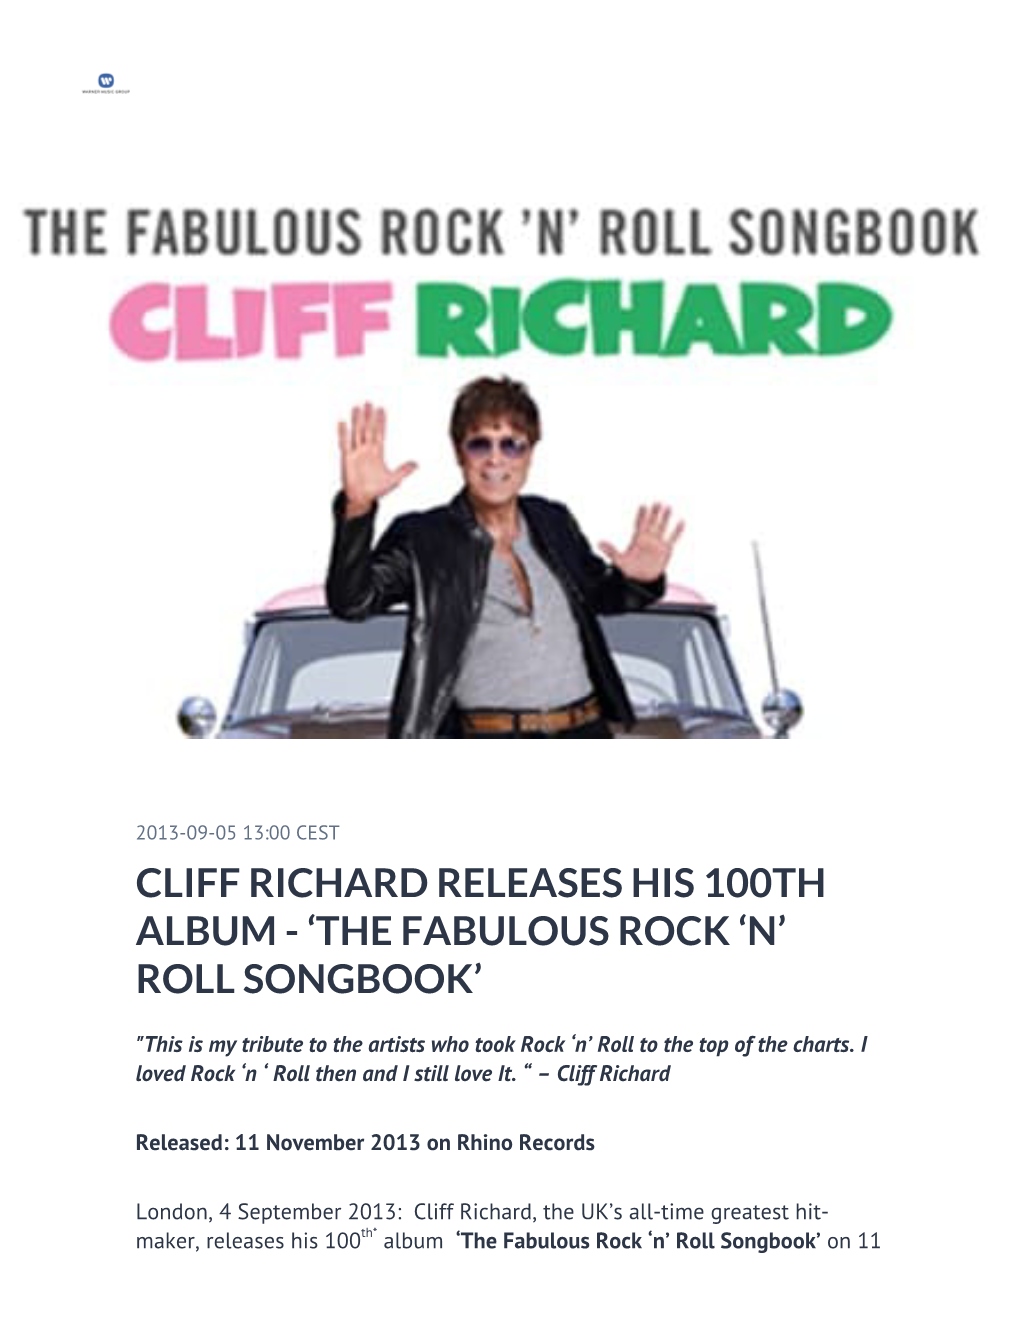 Cliff Richard Releases His 100Th Album - ‘The Fabulous Rock ‘N’ Roll Songbook’